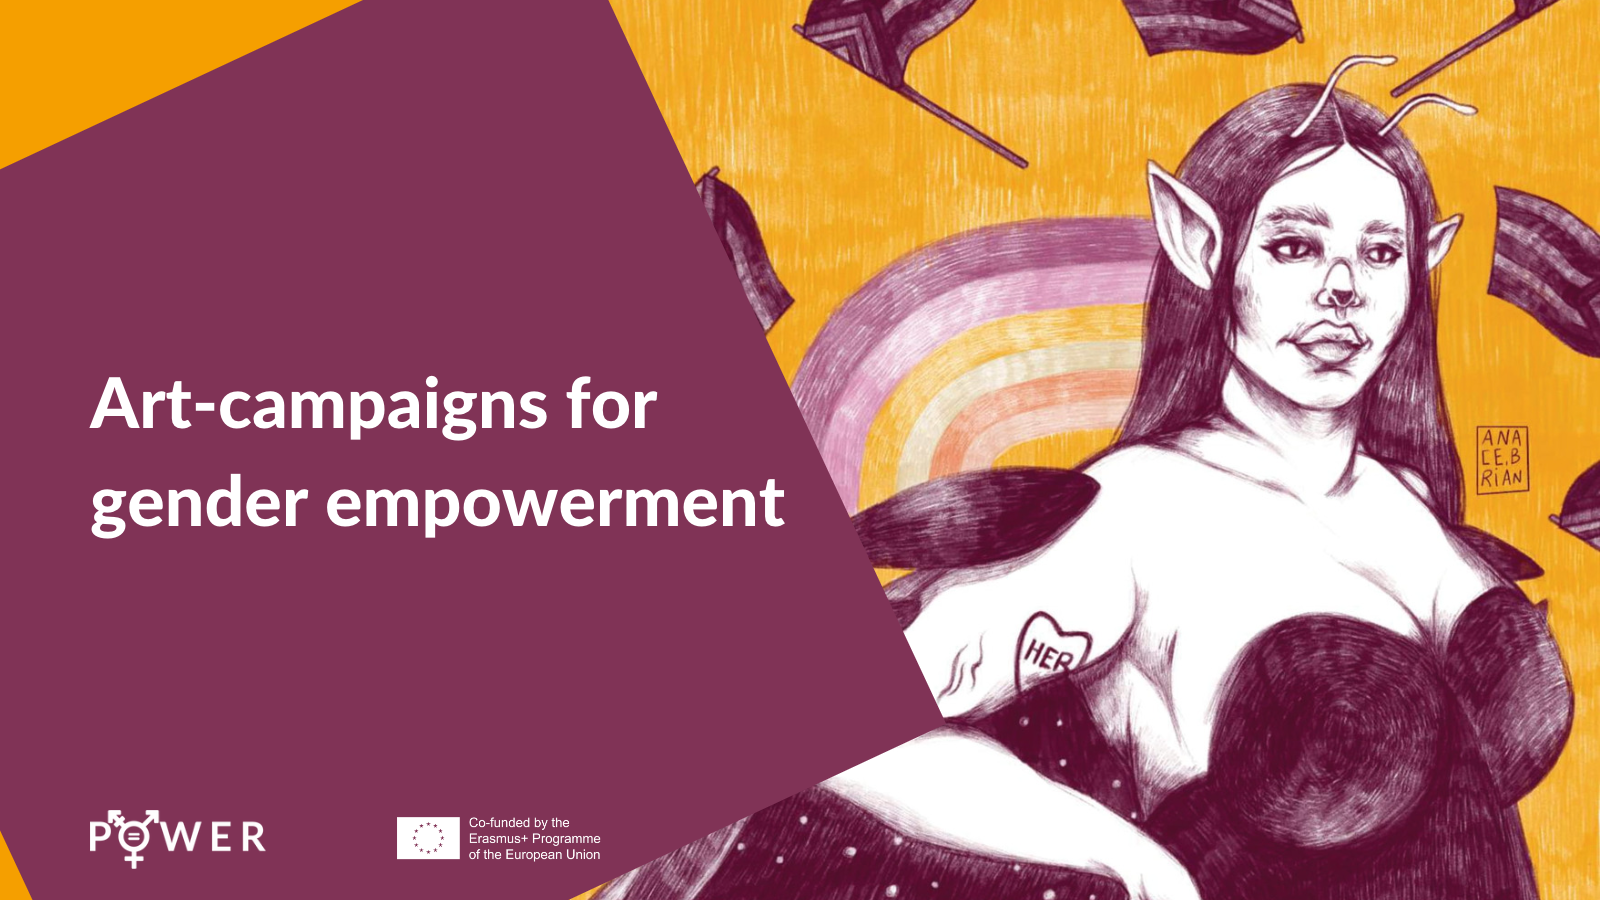 IO5 videos are online: art campaigns for gender empowerment